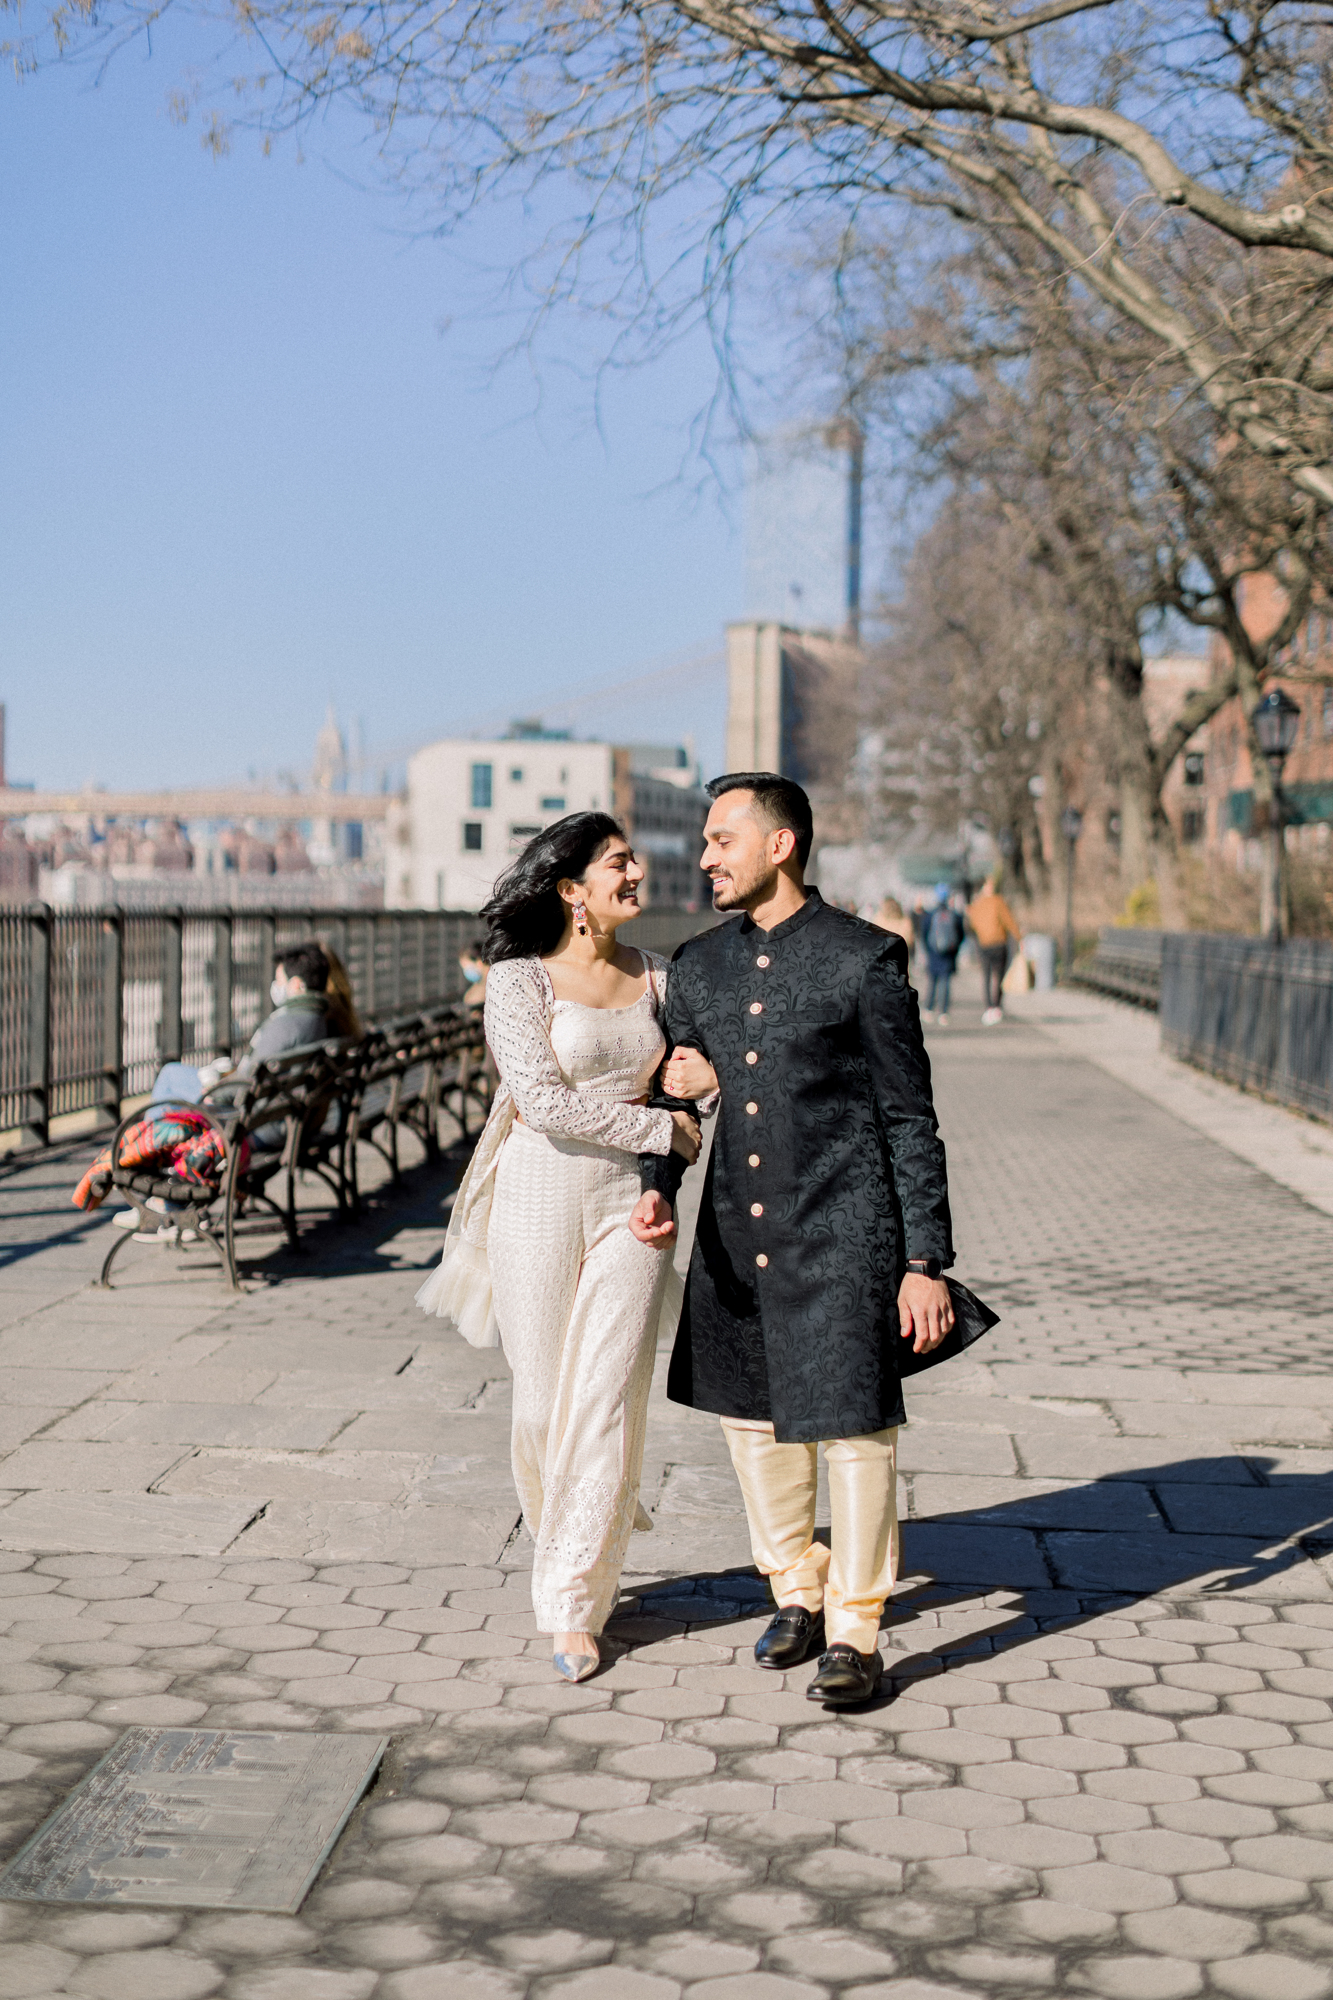 Stylish and Wintery Brooklyn Heights Promenade Engagement Photos